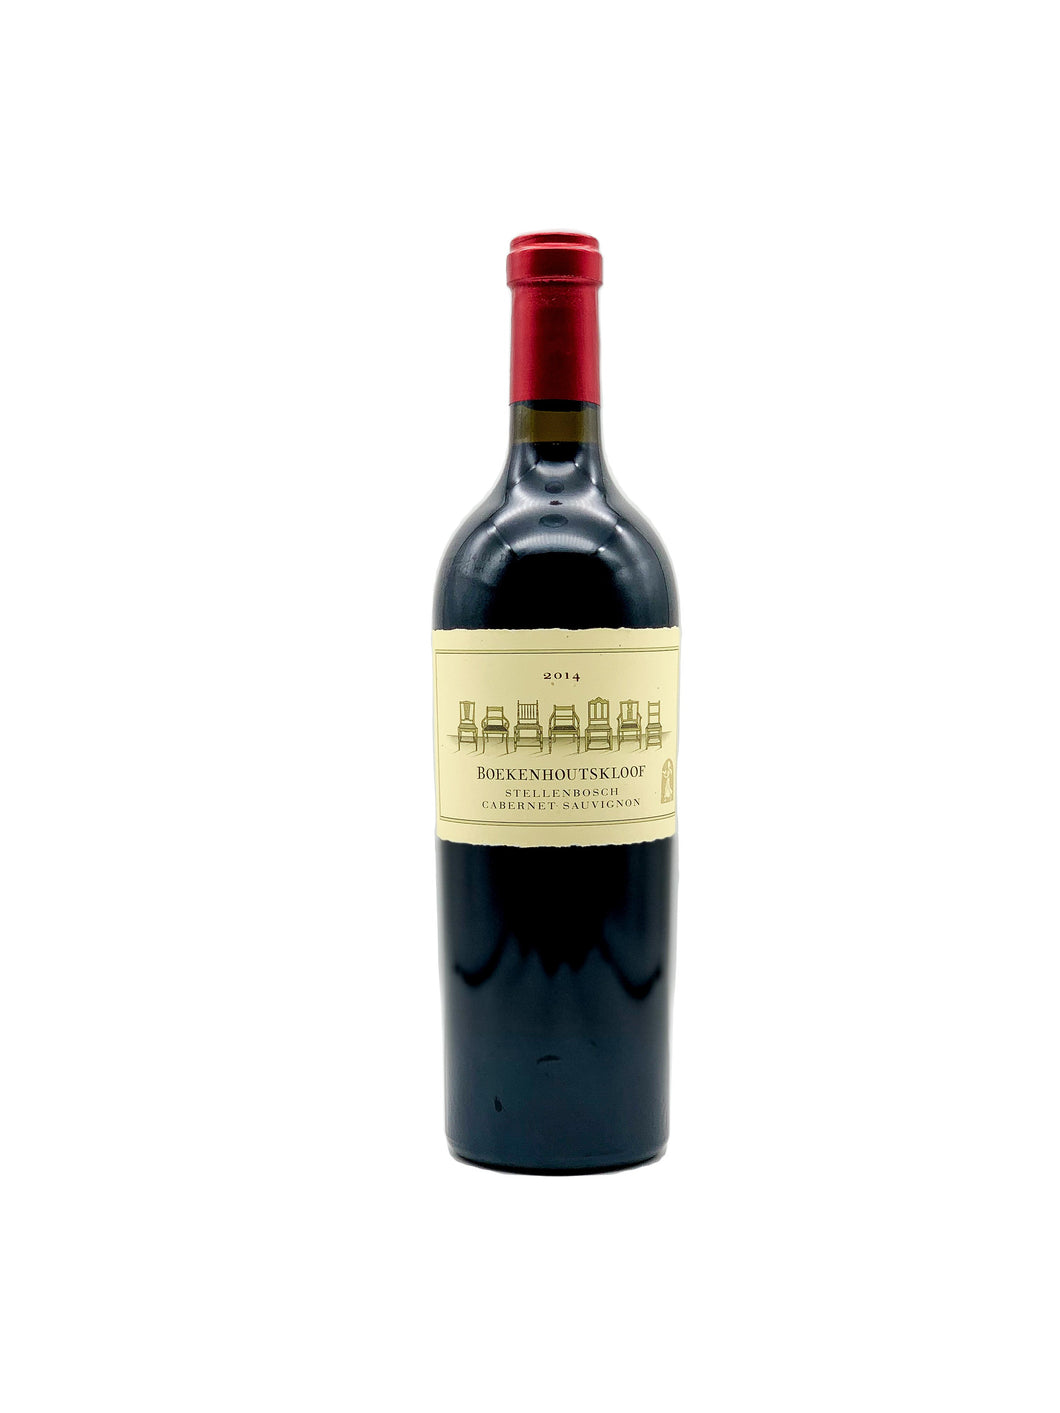 Picture of single 75cl bottle of Boekenhoutskloof, Cabernet Sauvignon 2014 on a white background